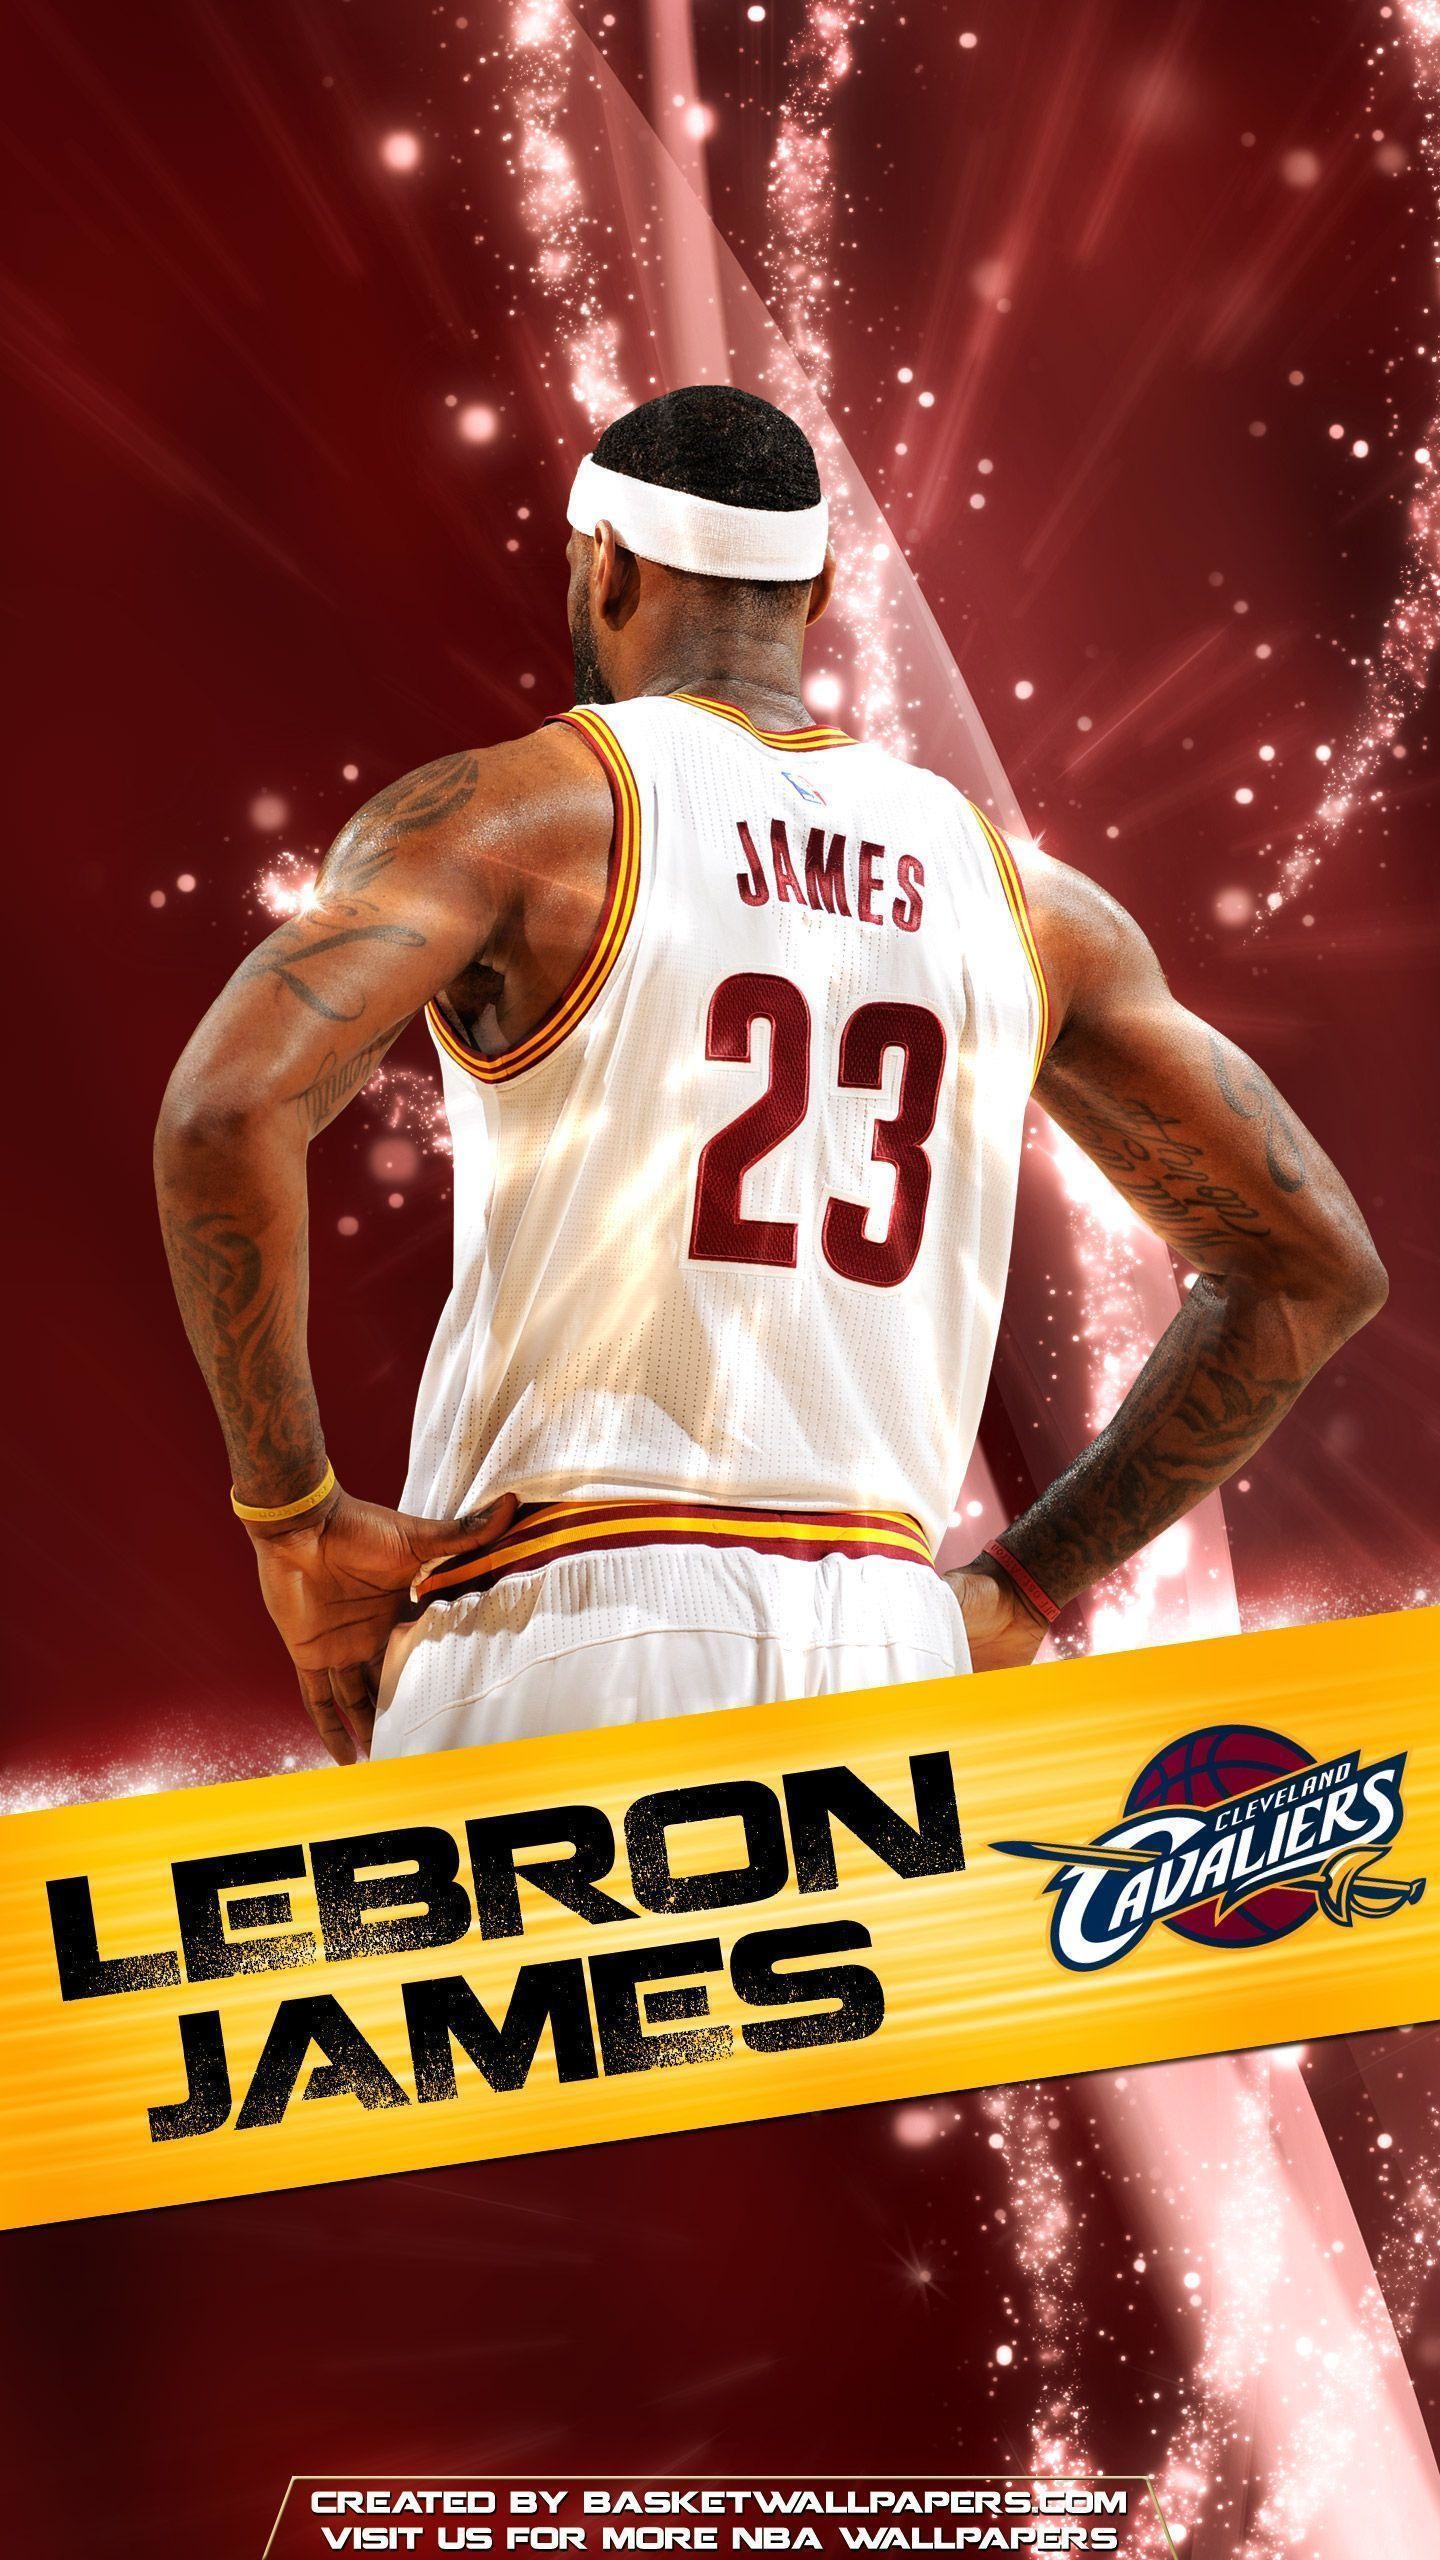 nba wallpapers lebron james,basketball player,jersey,poster,muscle,advertising